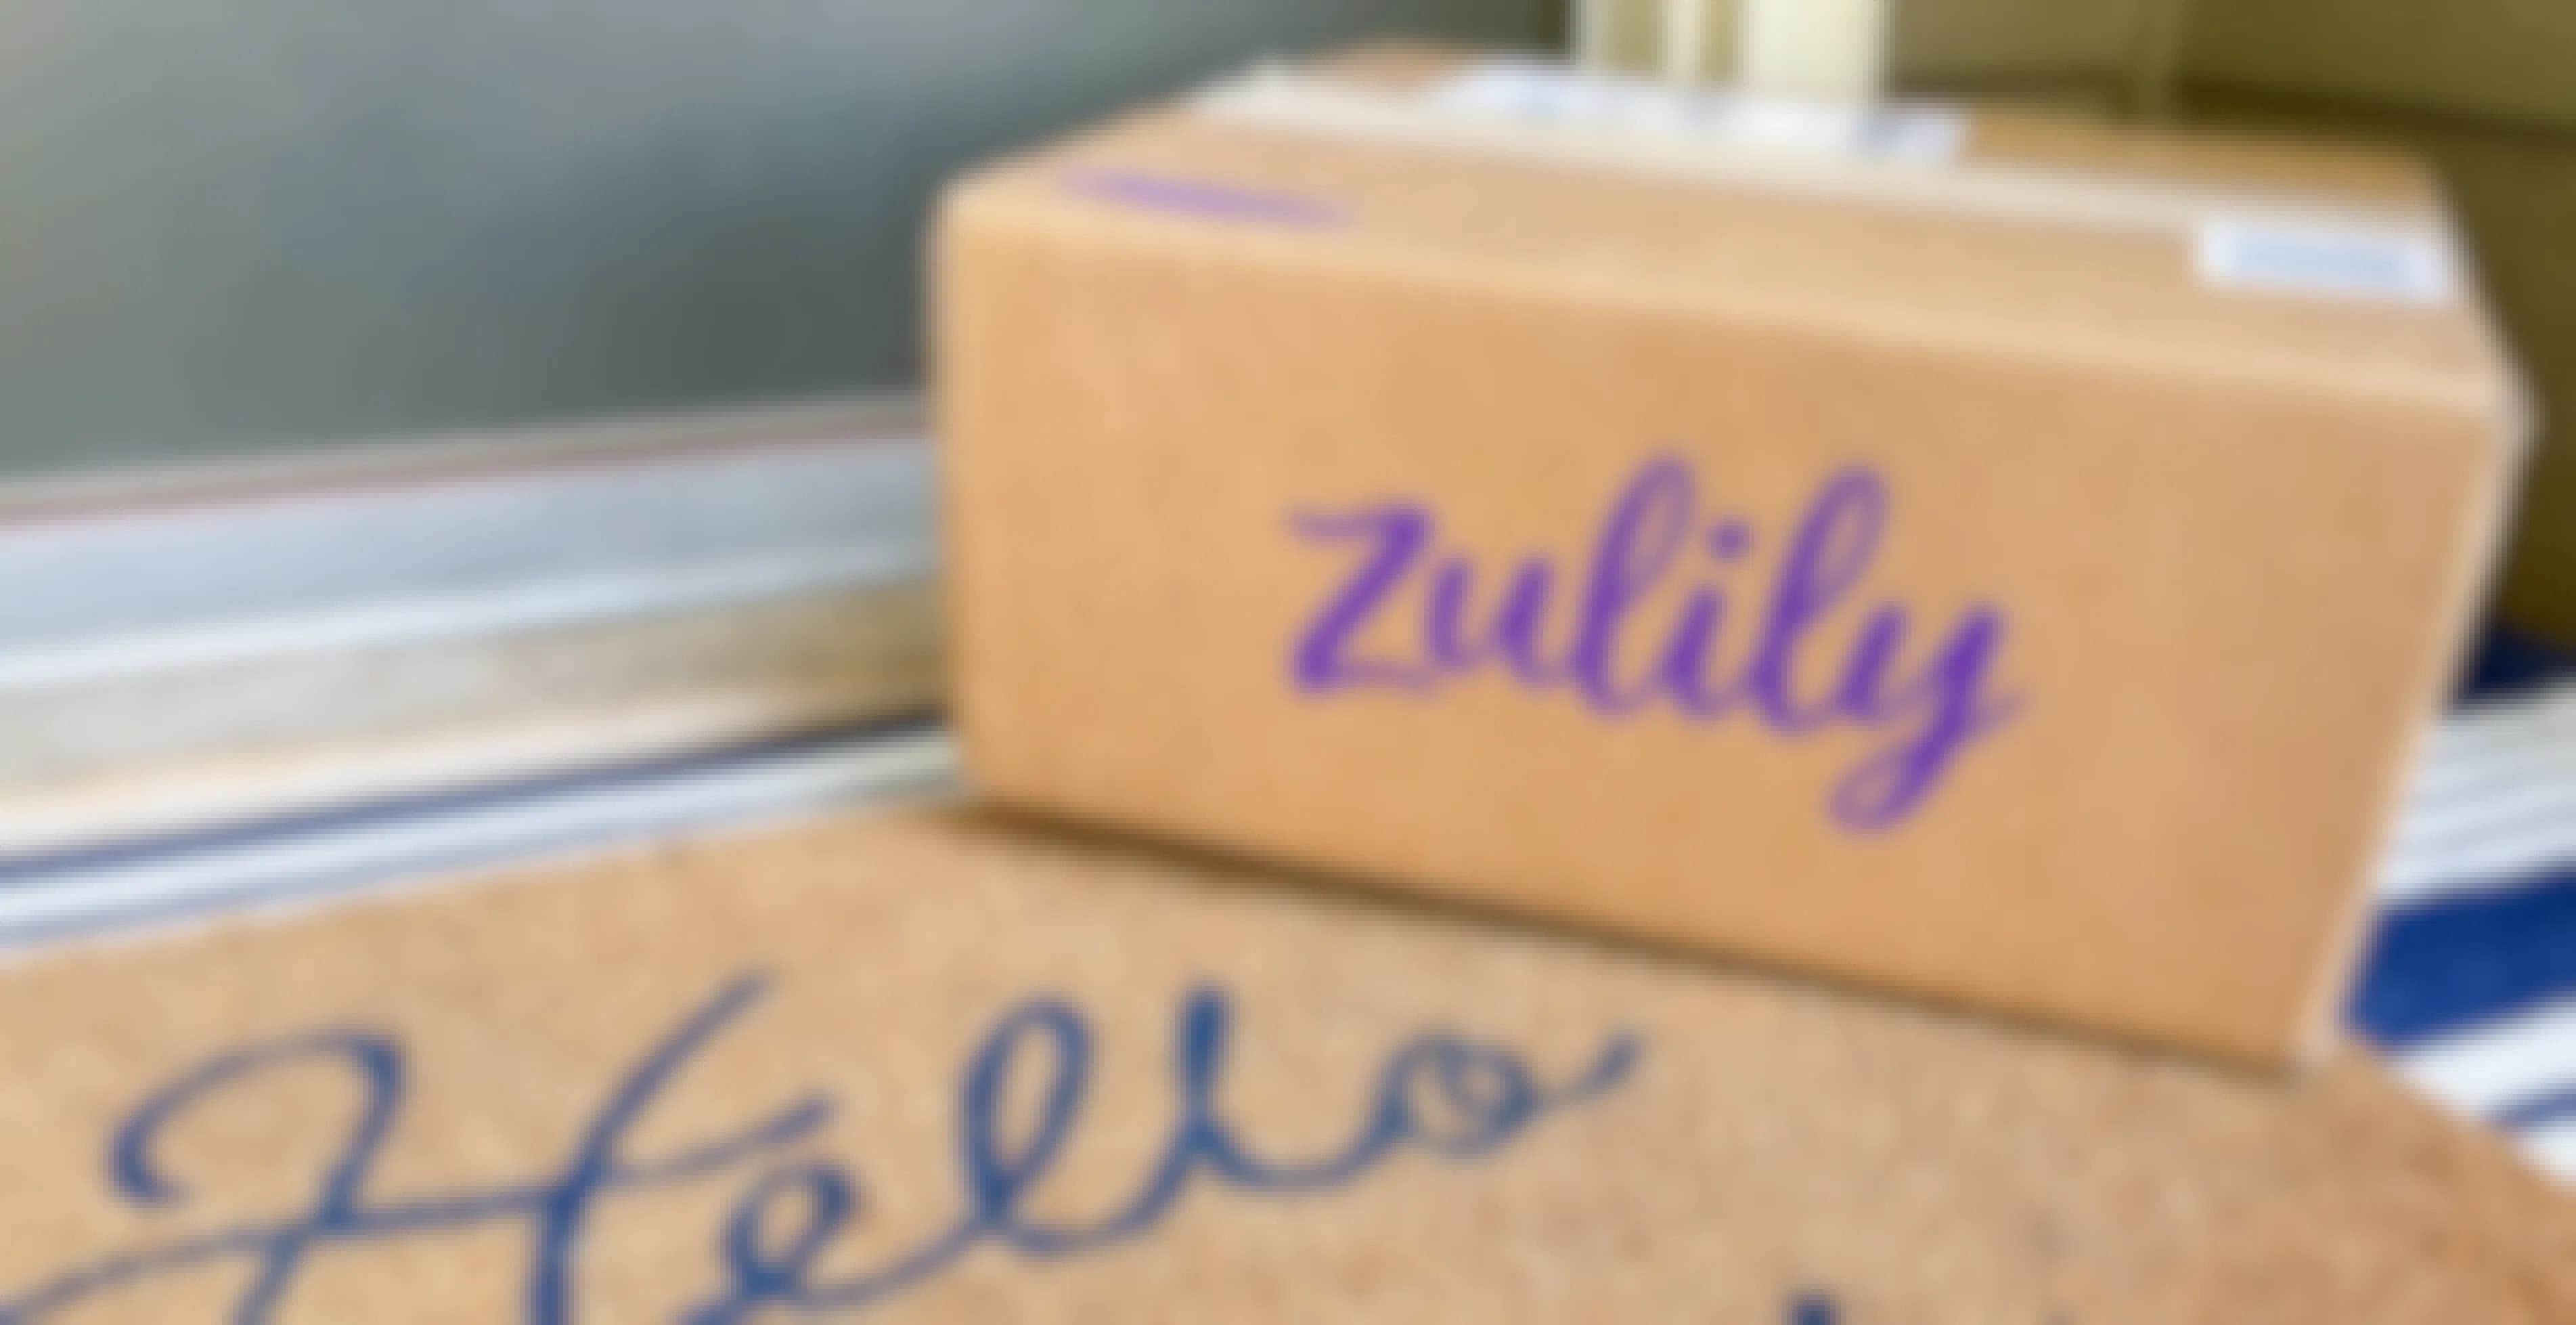 Want Zulily Free Shipping? Use These 5 Easy Ways